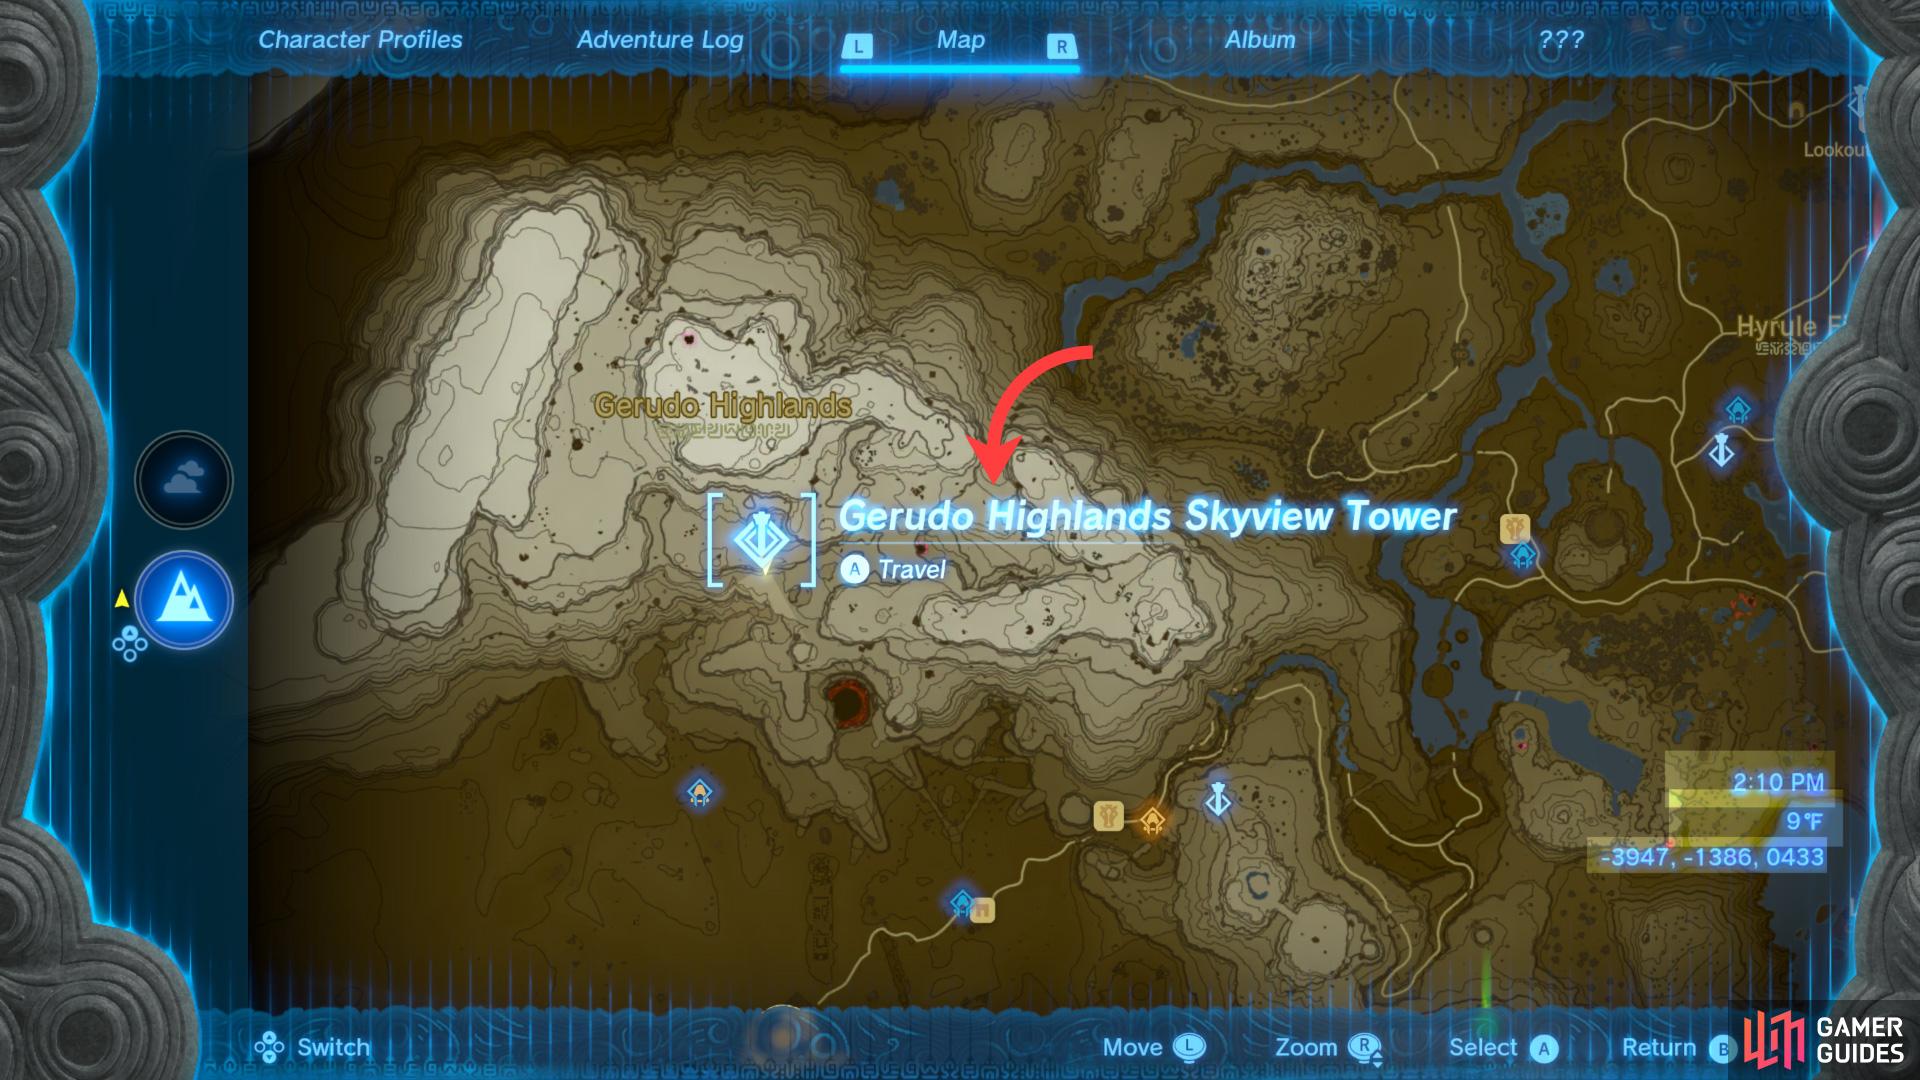 The Gerudo Highlands Skyview Tower is located along the south-center of the inhospitable Gerudo Highlands subregion. Scaling from the northeast and looking for sky stones might be the best way to reach your destination.